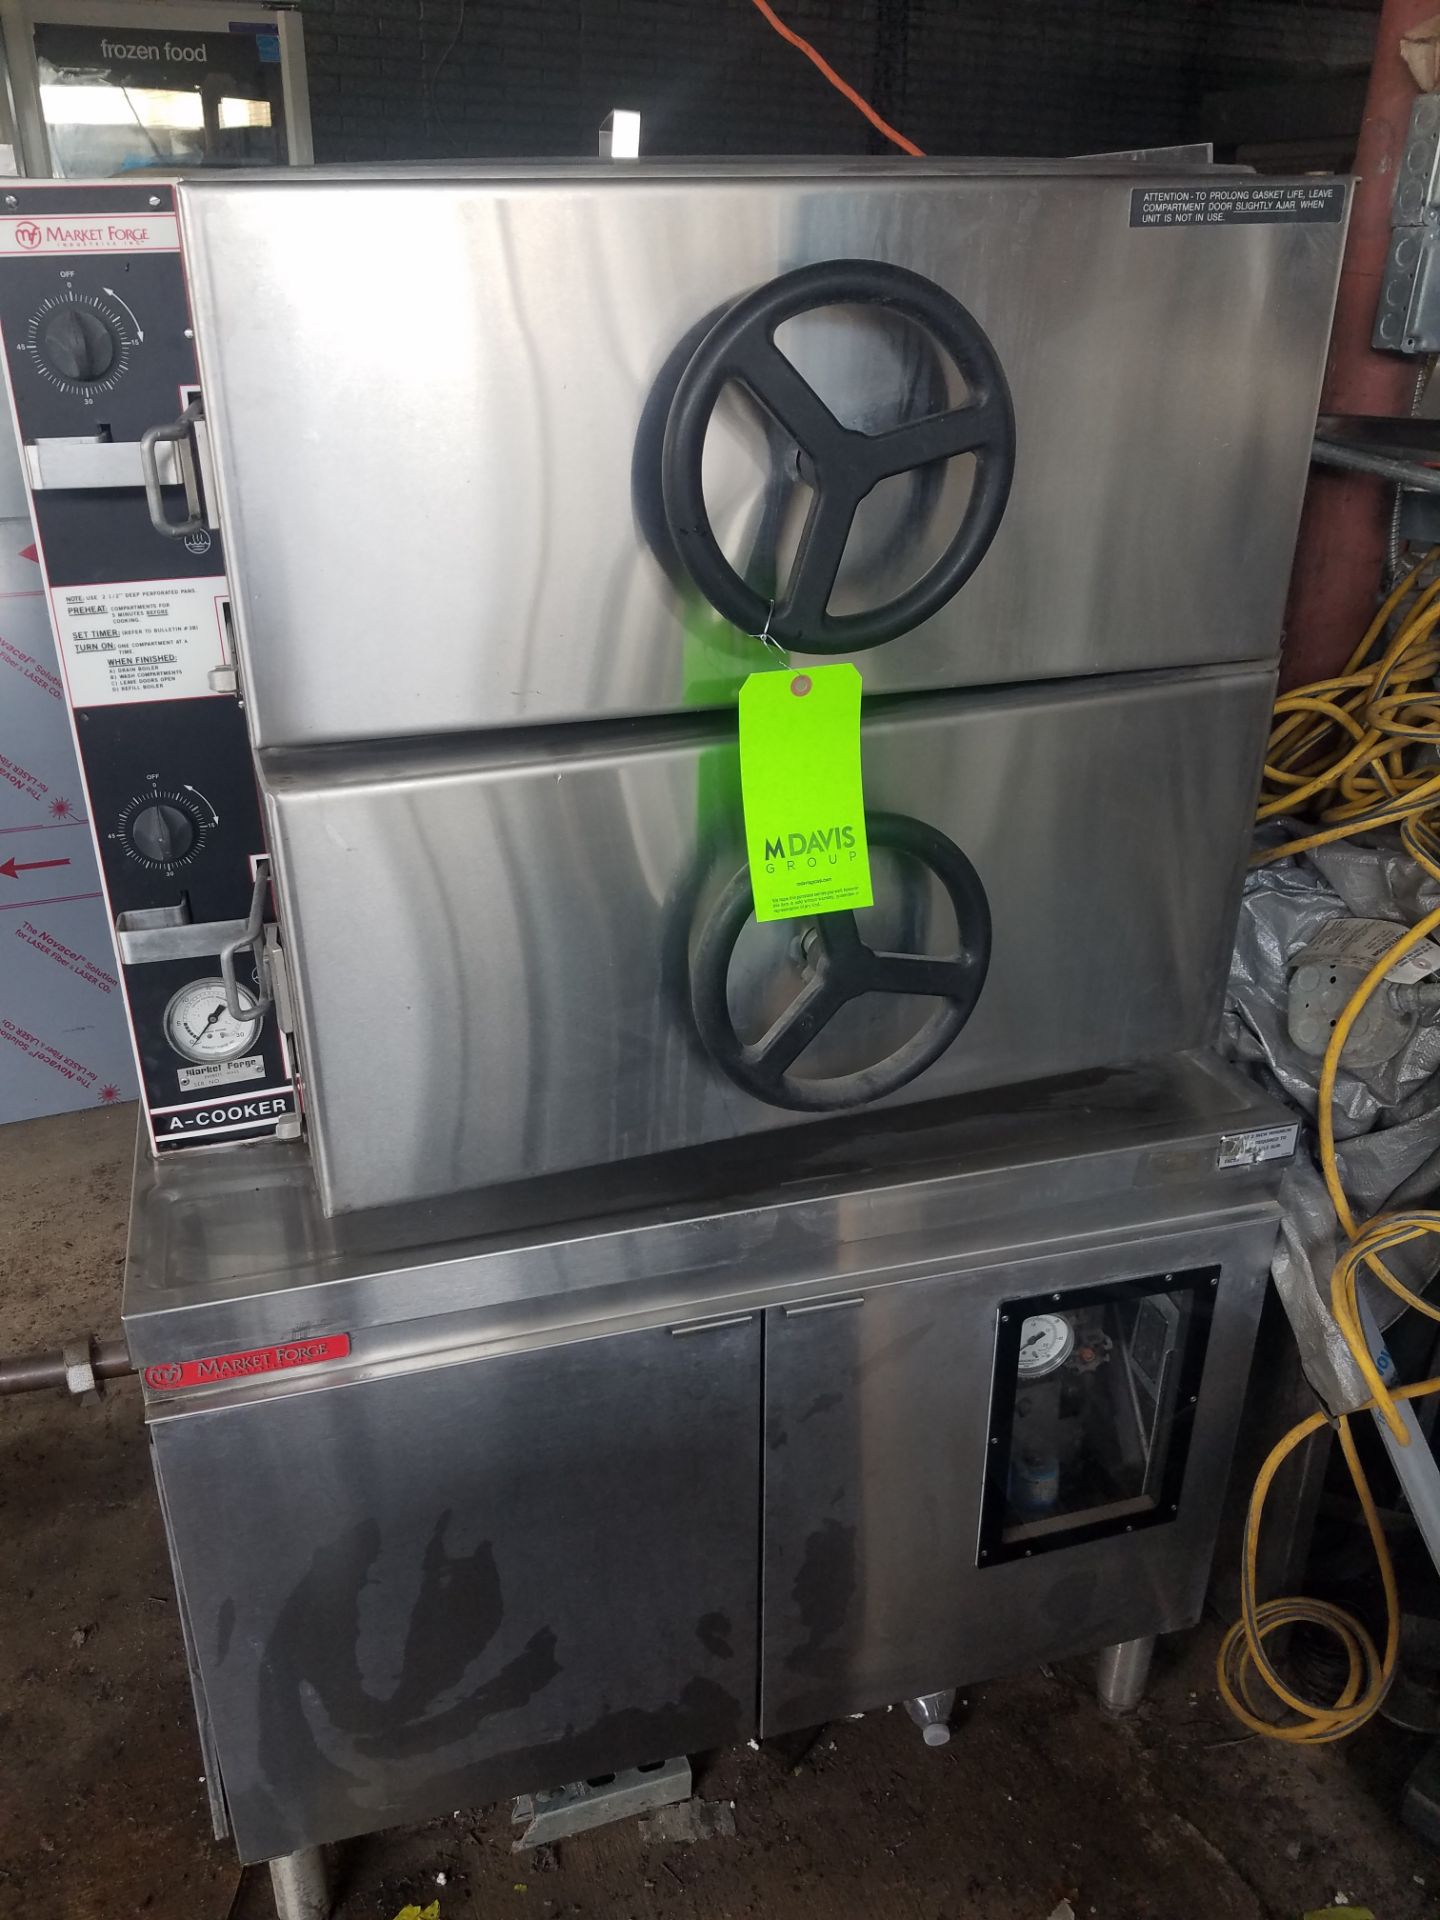 Market Forge Gas Steam Oven, Model 2A1, S/N 216508 (Rigging, Loading & Site Management Fee $50.00